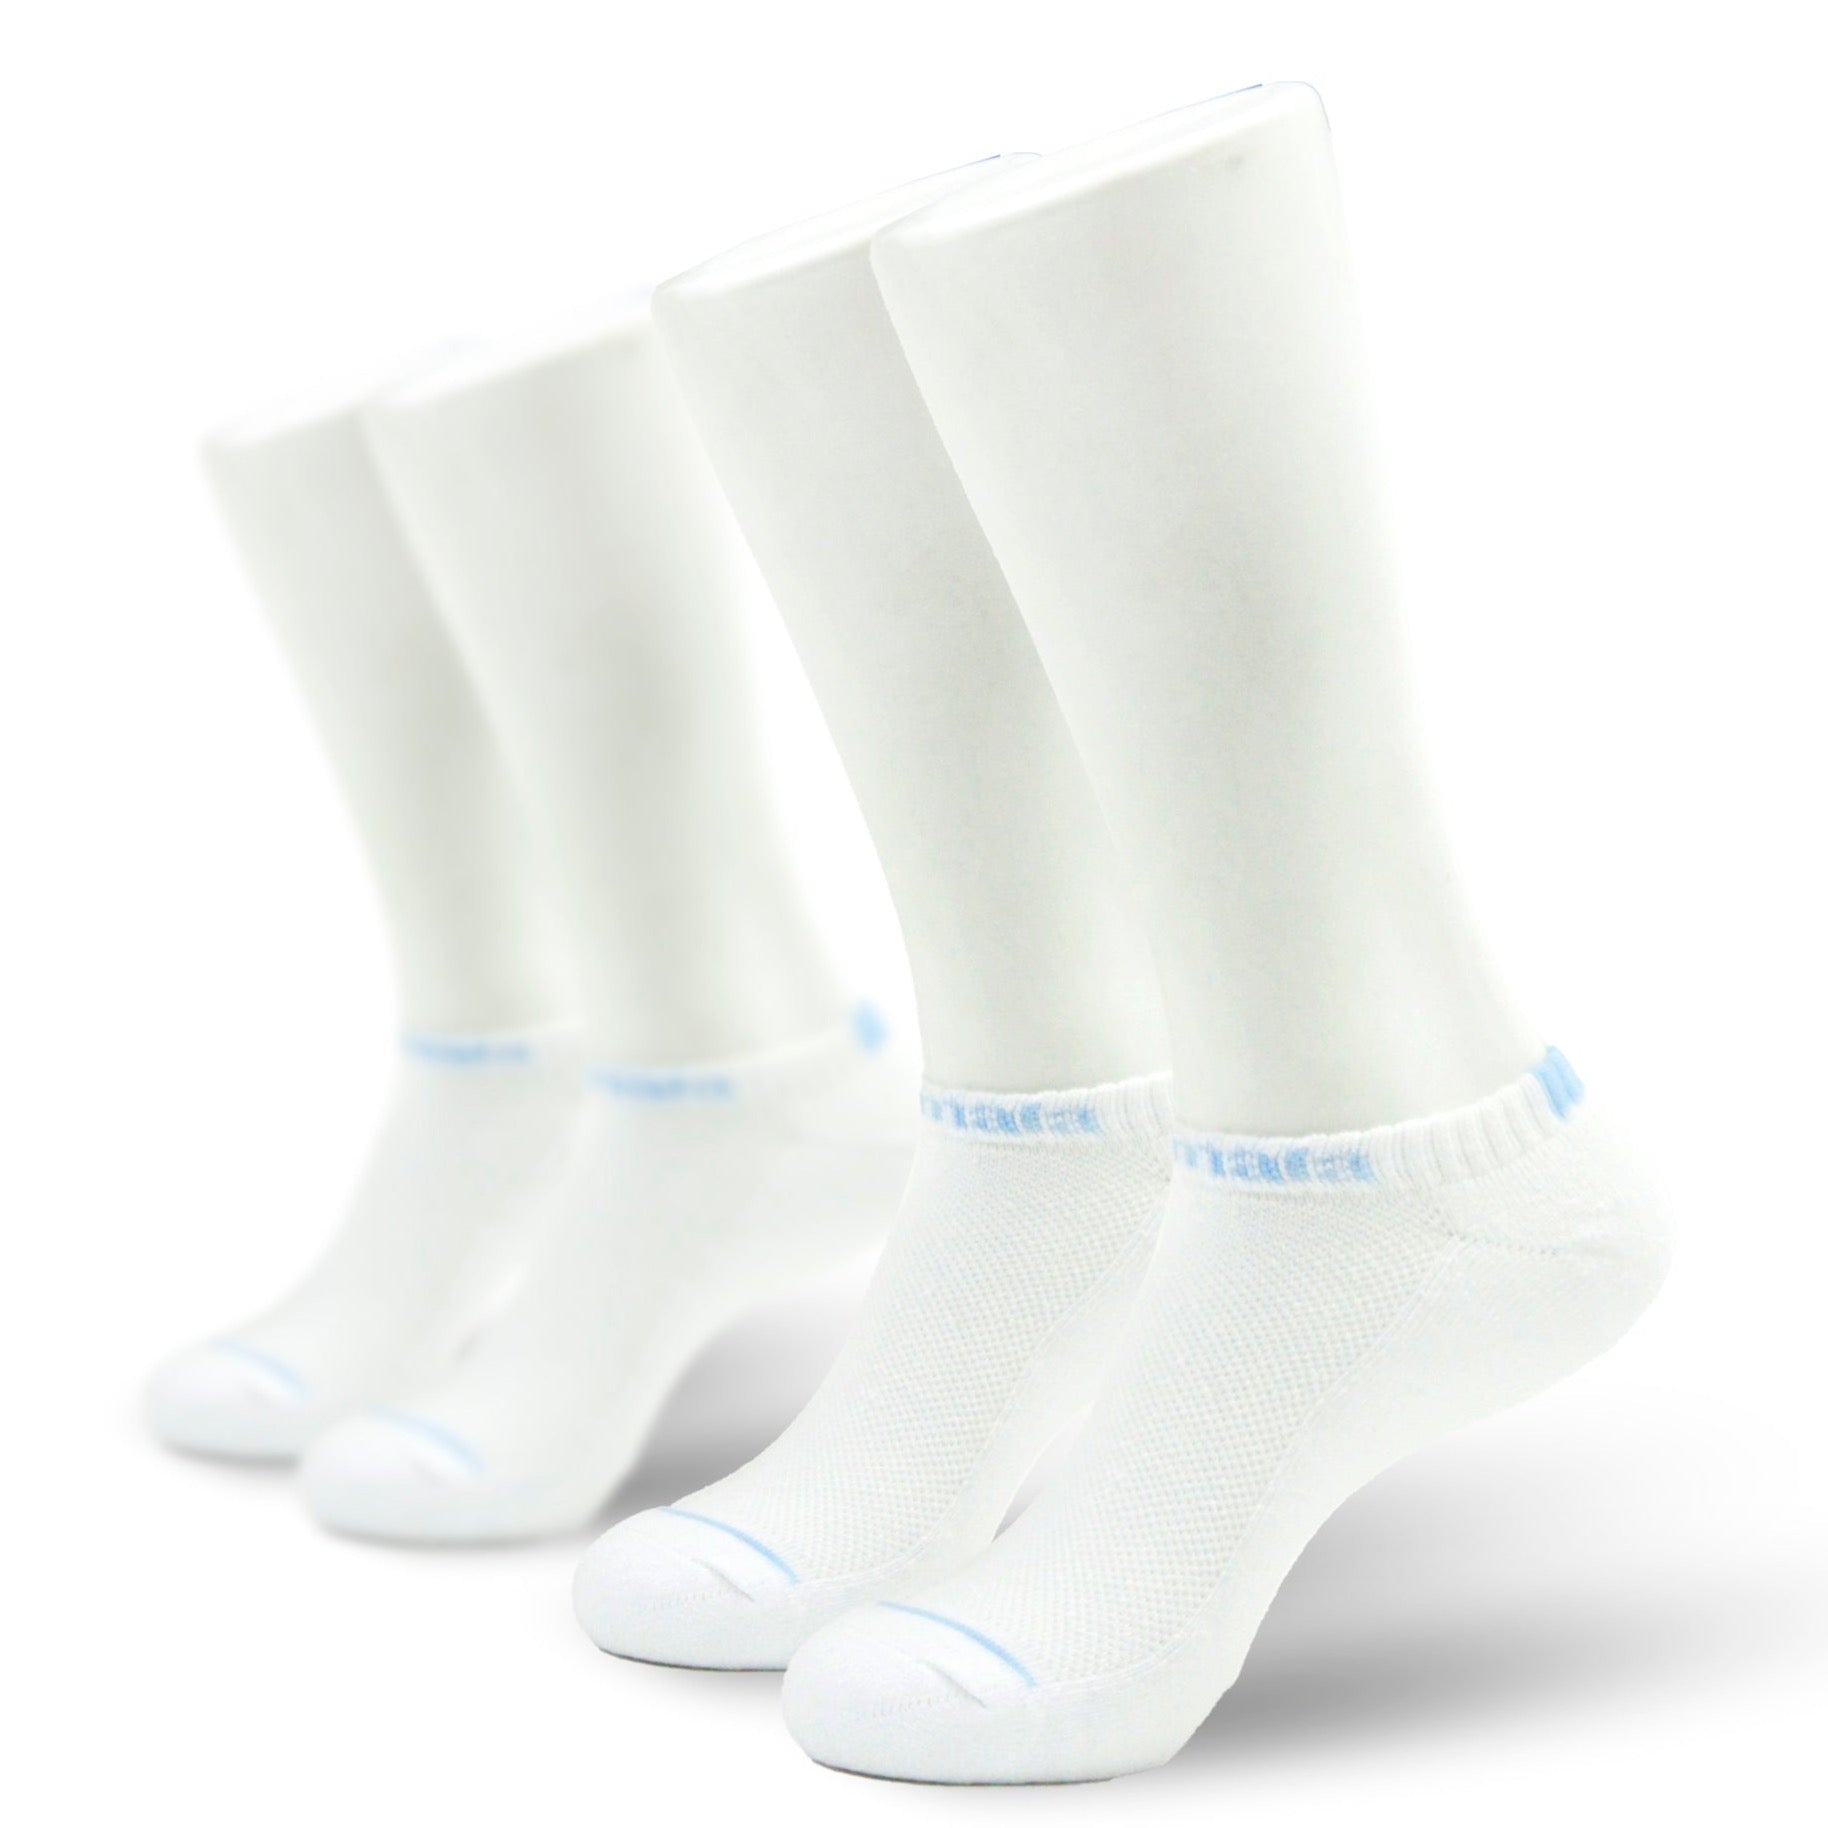 2 Pack Calcetines Deportivos Cortos Guate Lovers 03 - Hombre